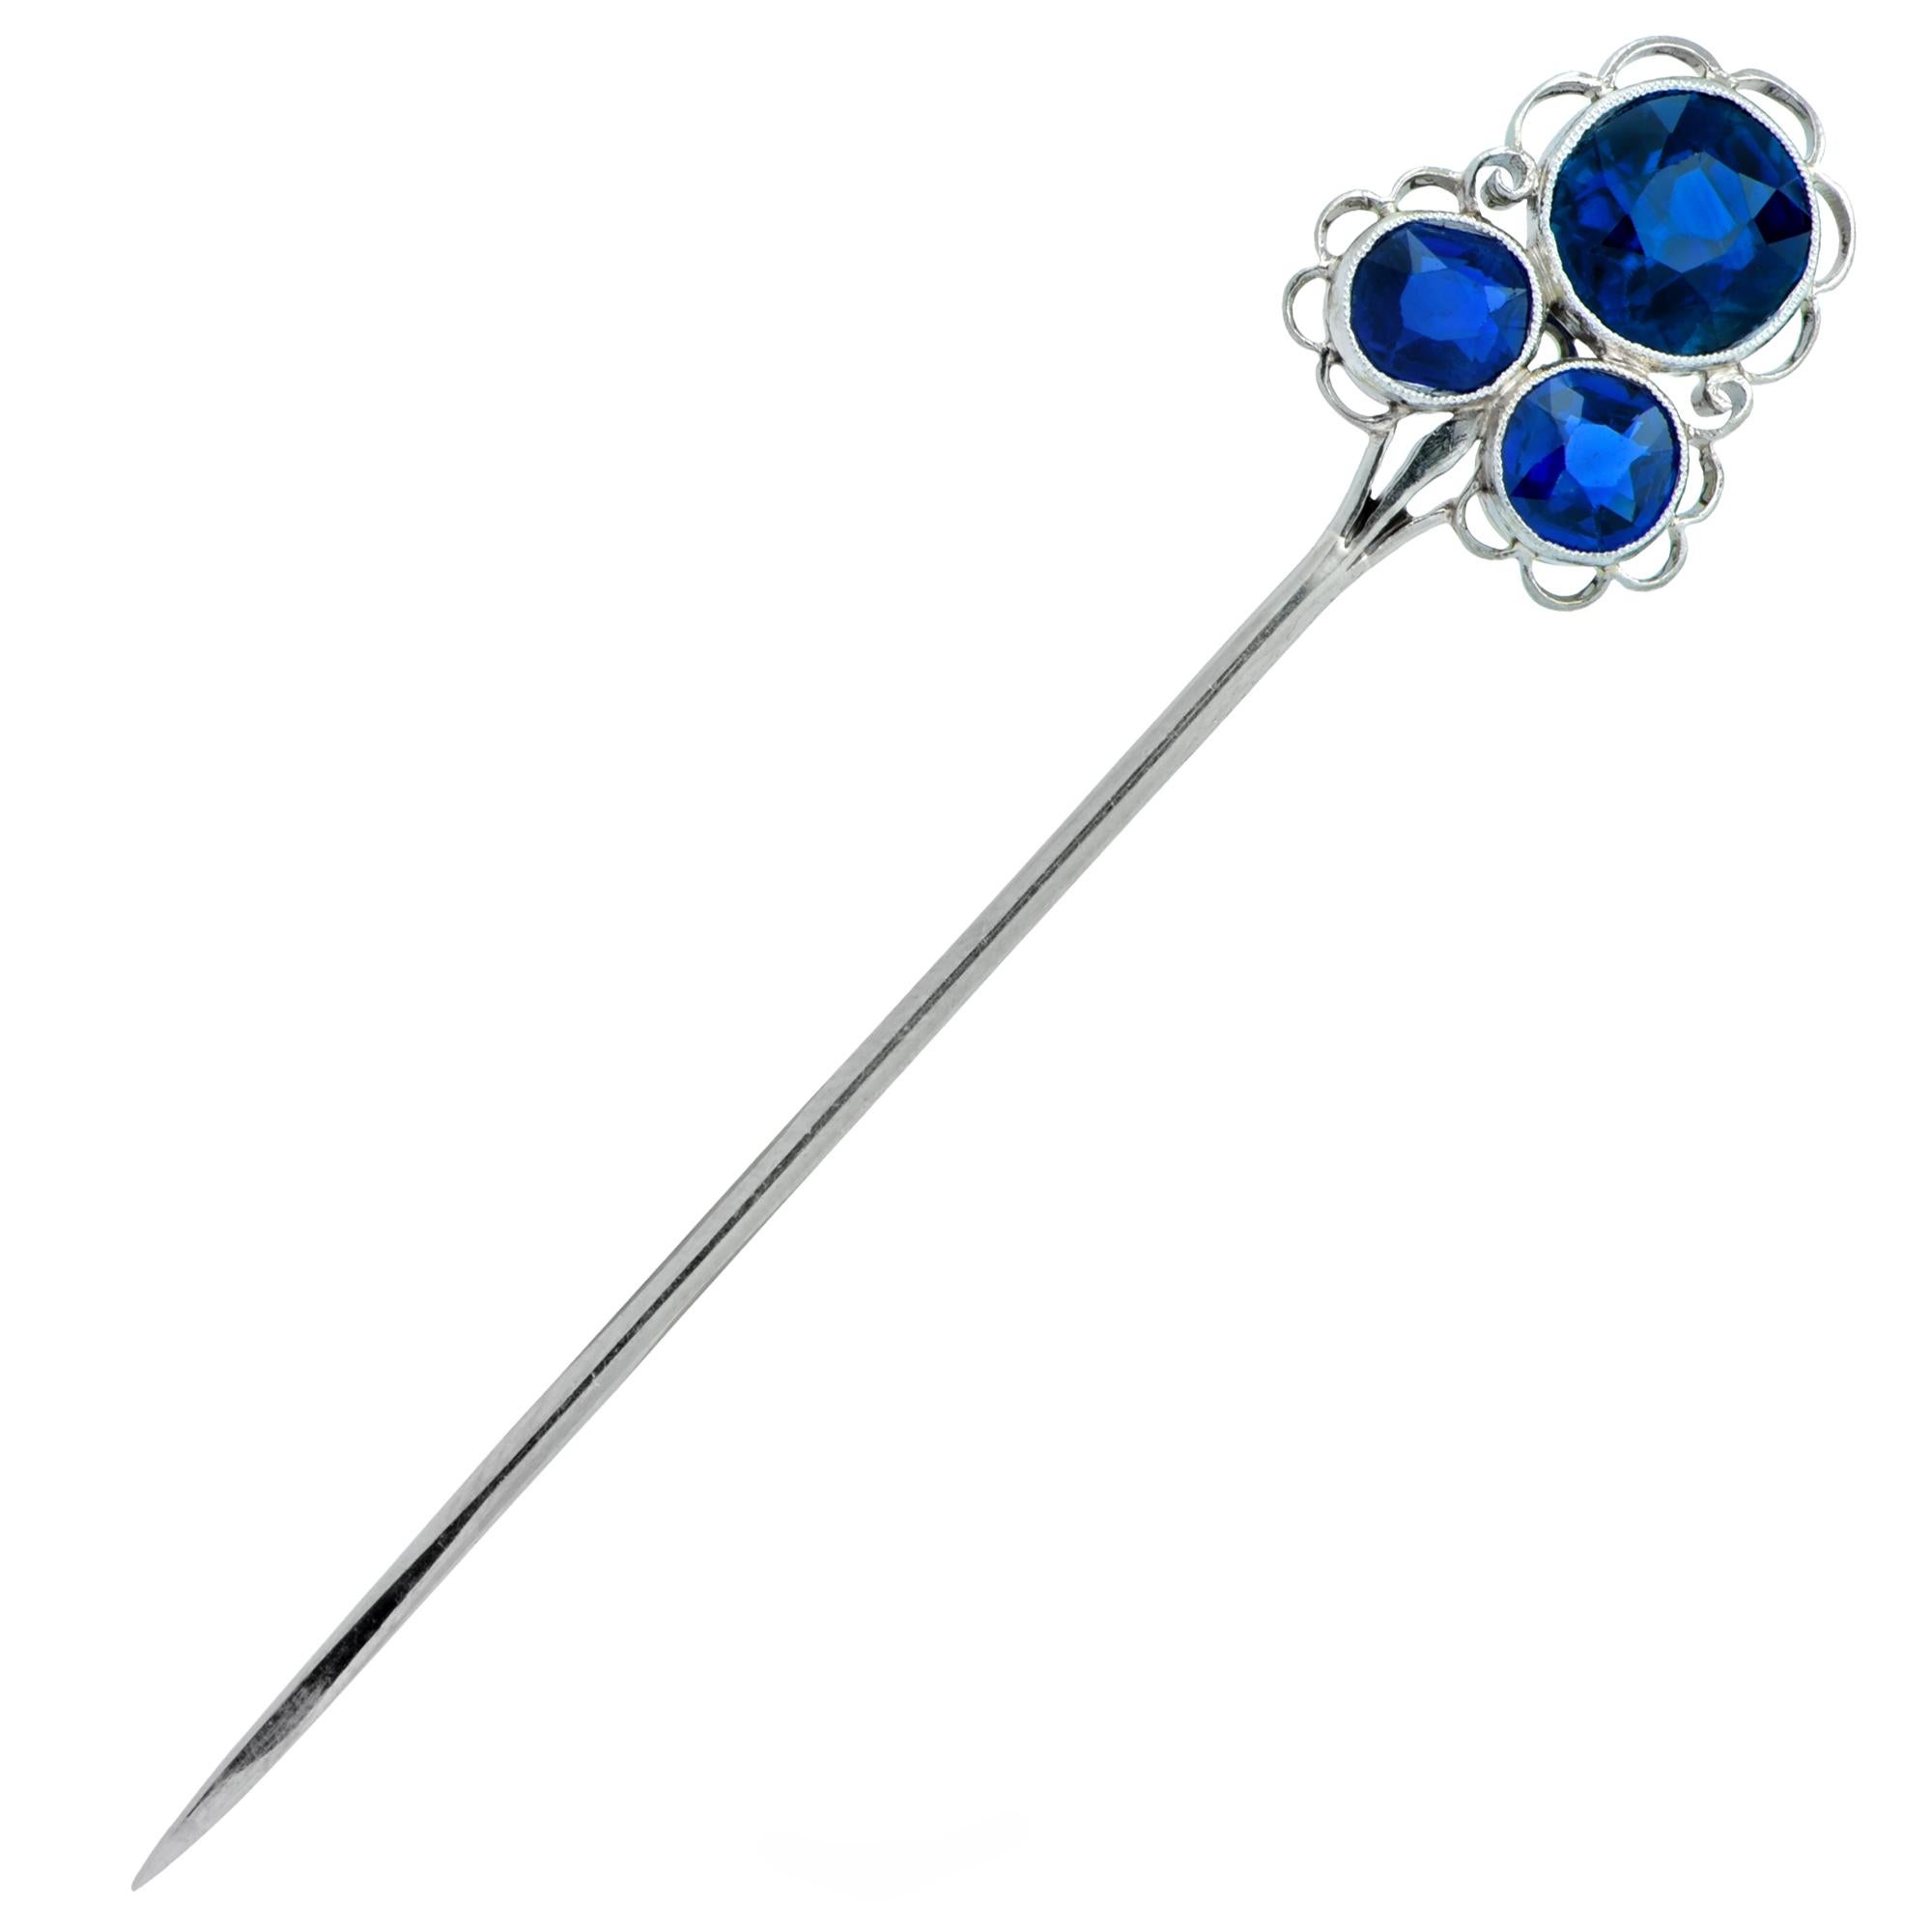 Delightful  brooch pin crafted in platinum, featuring 2.50 carats total weight of round blue sapphires. 1 round cut sapphire weighing approximately 1.50 carats, rests on 2 round cut sapphires weighing approximately 1 carat total, adorned with fine